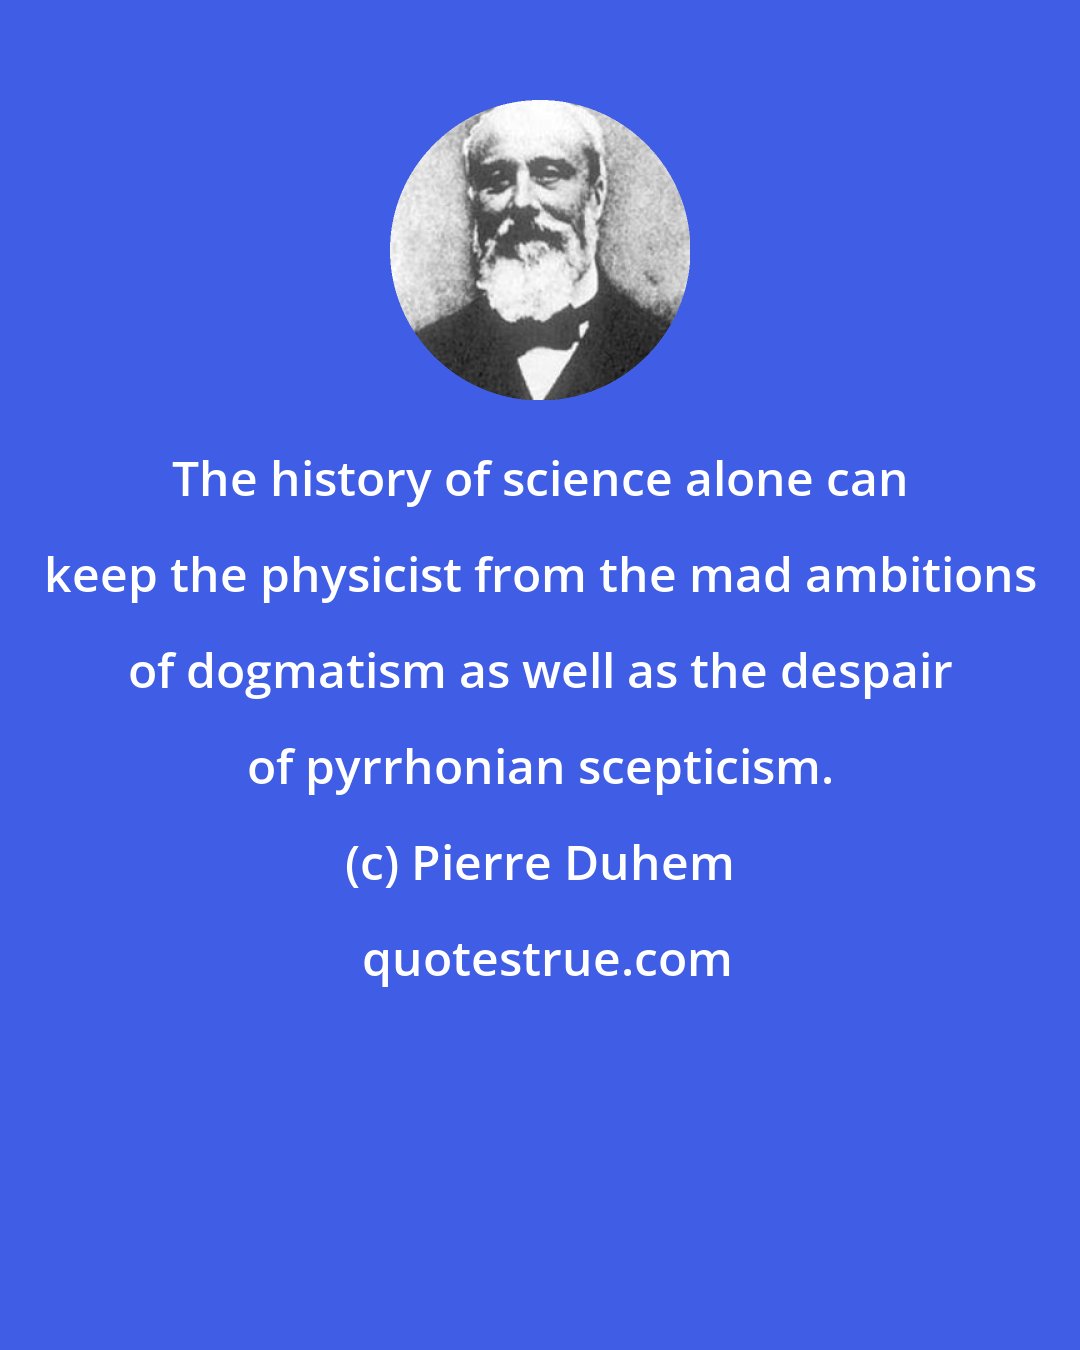 Pierre Duhem: The history of science alone can keep the physicist from the mad ambitions of dogmatism as well as the despair of pyrrhonian scepticism.